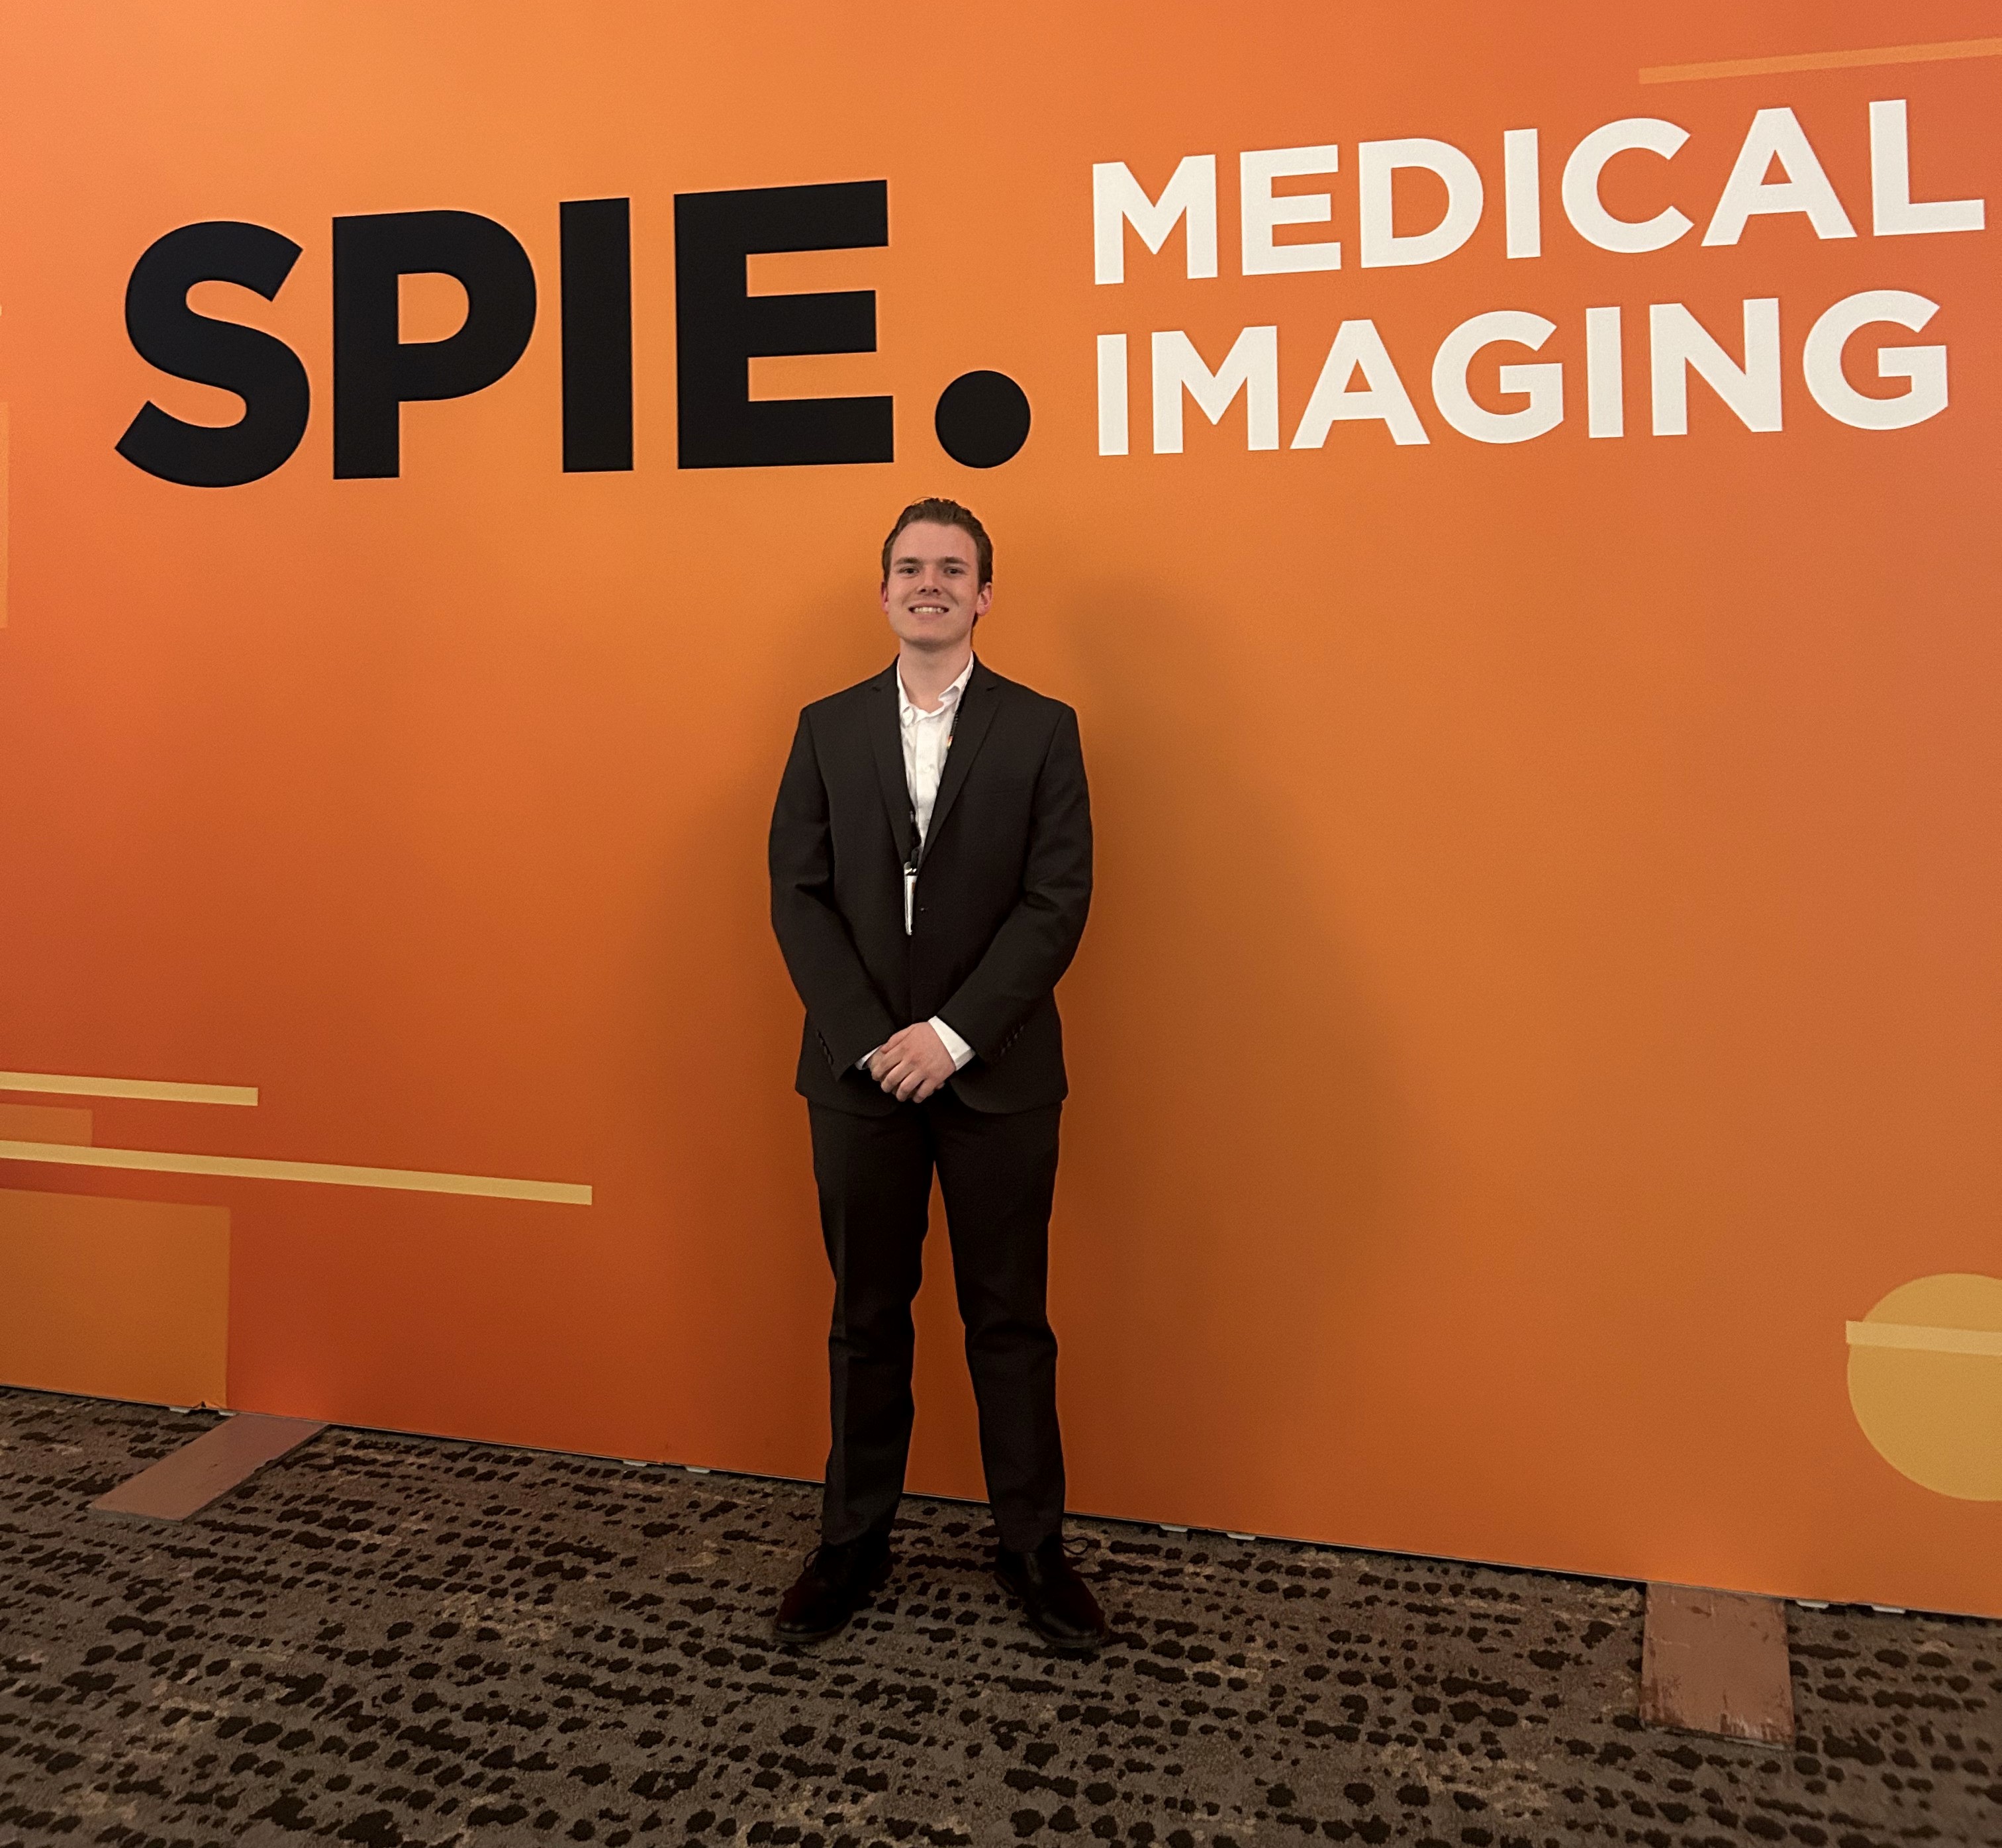 My First Time at SPIE Medical Imaging Adam Saunders Research